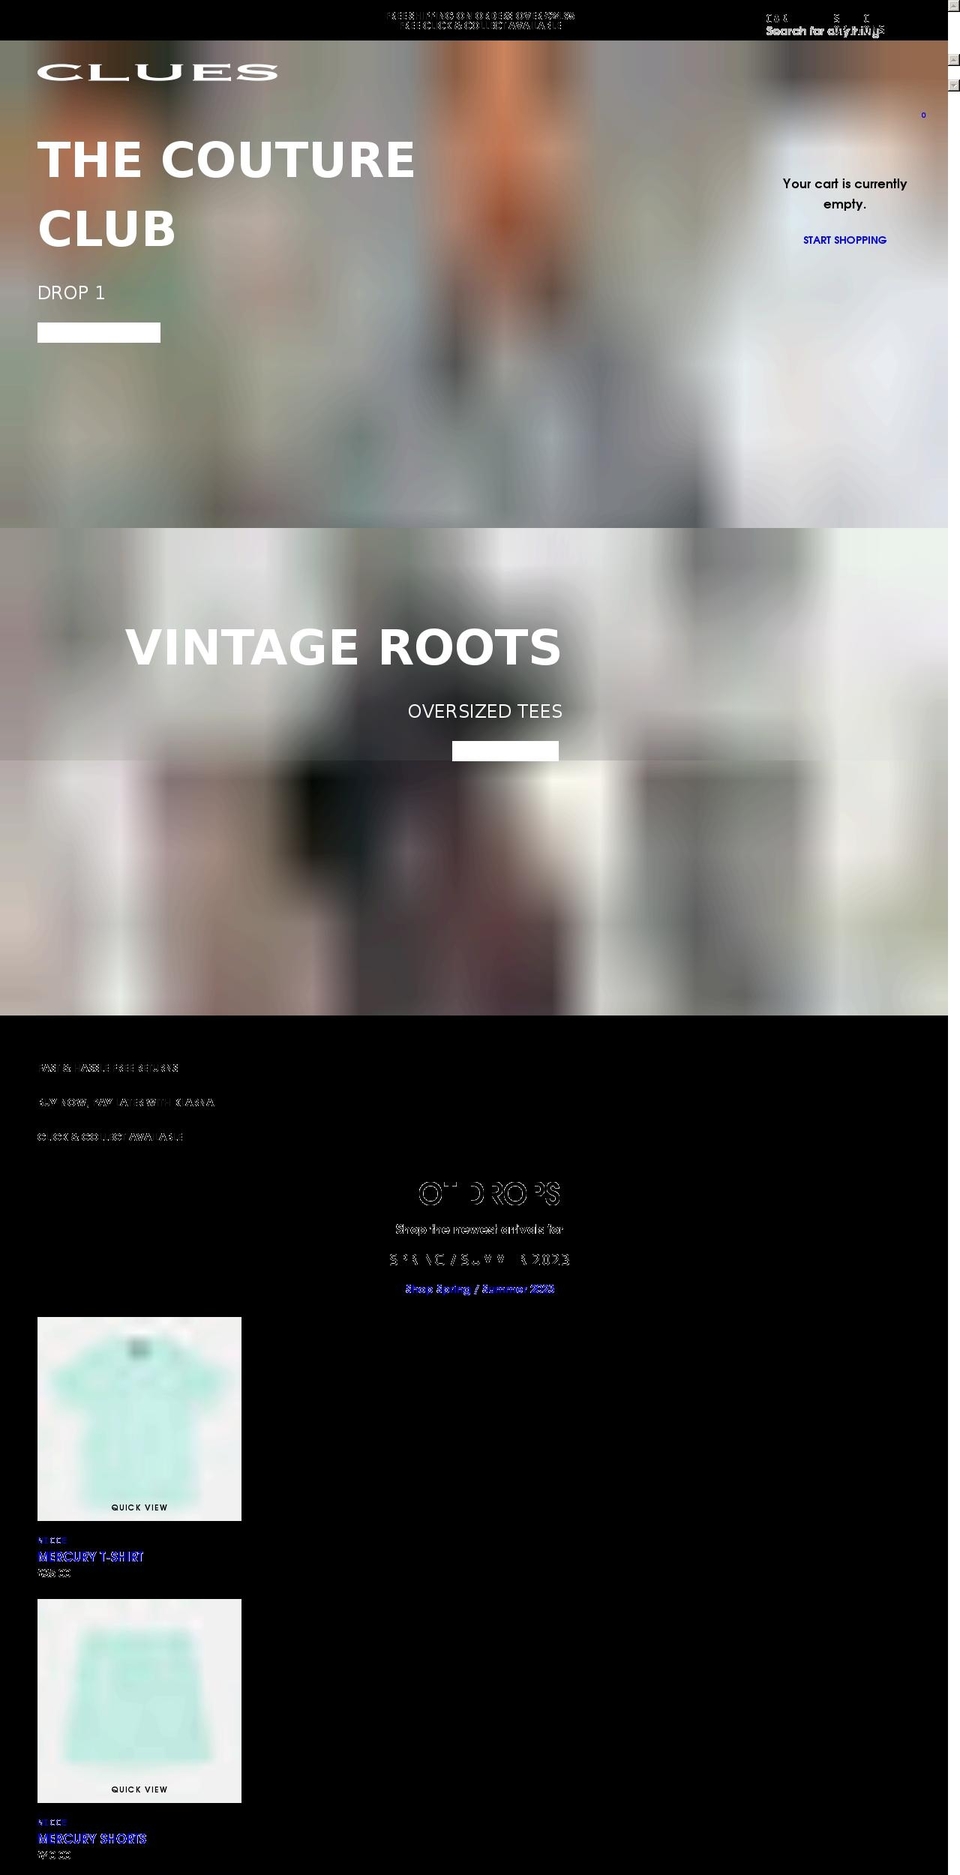 Reformation Shopify theme site example cluesfashion.co.uk